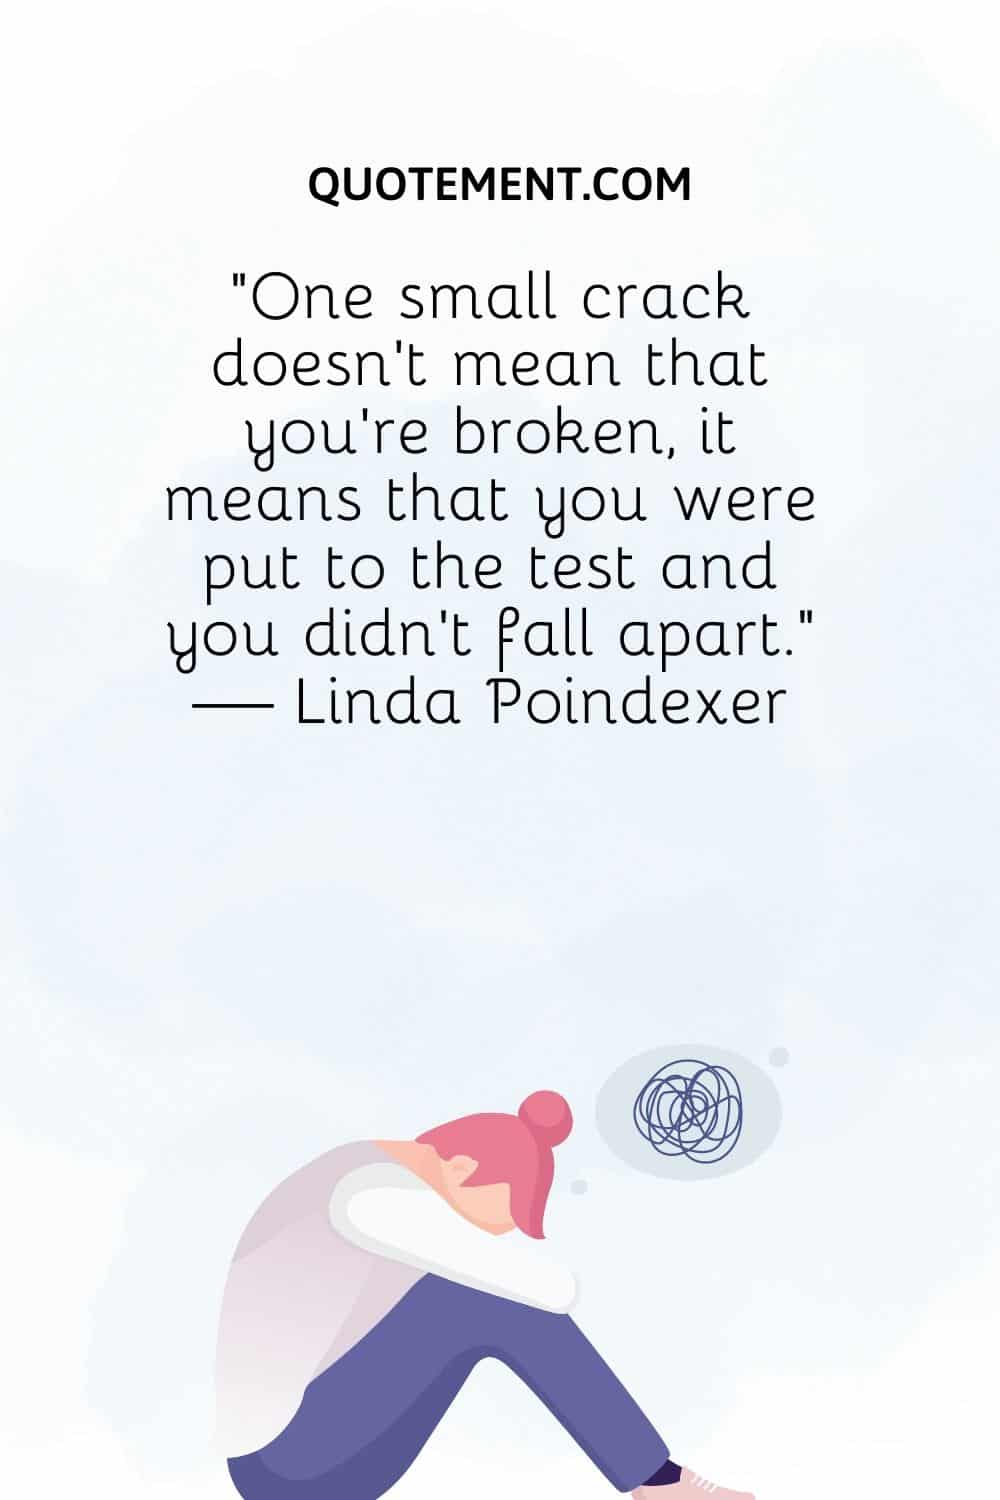 One small crack doesn’t mean that you’re broken, it means that you were put to the test and you didn’t fall apart